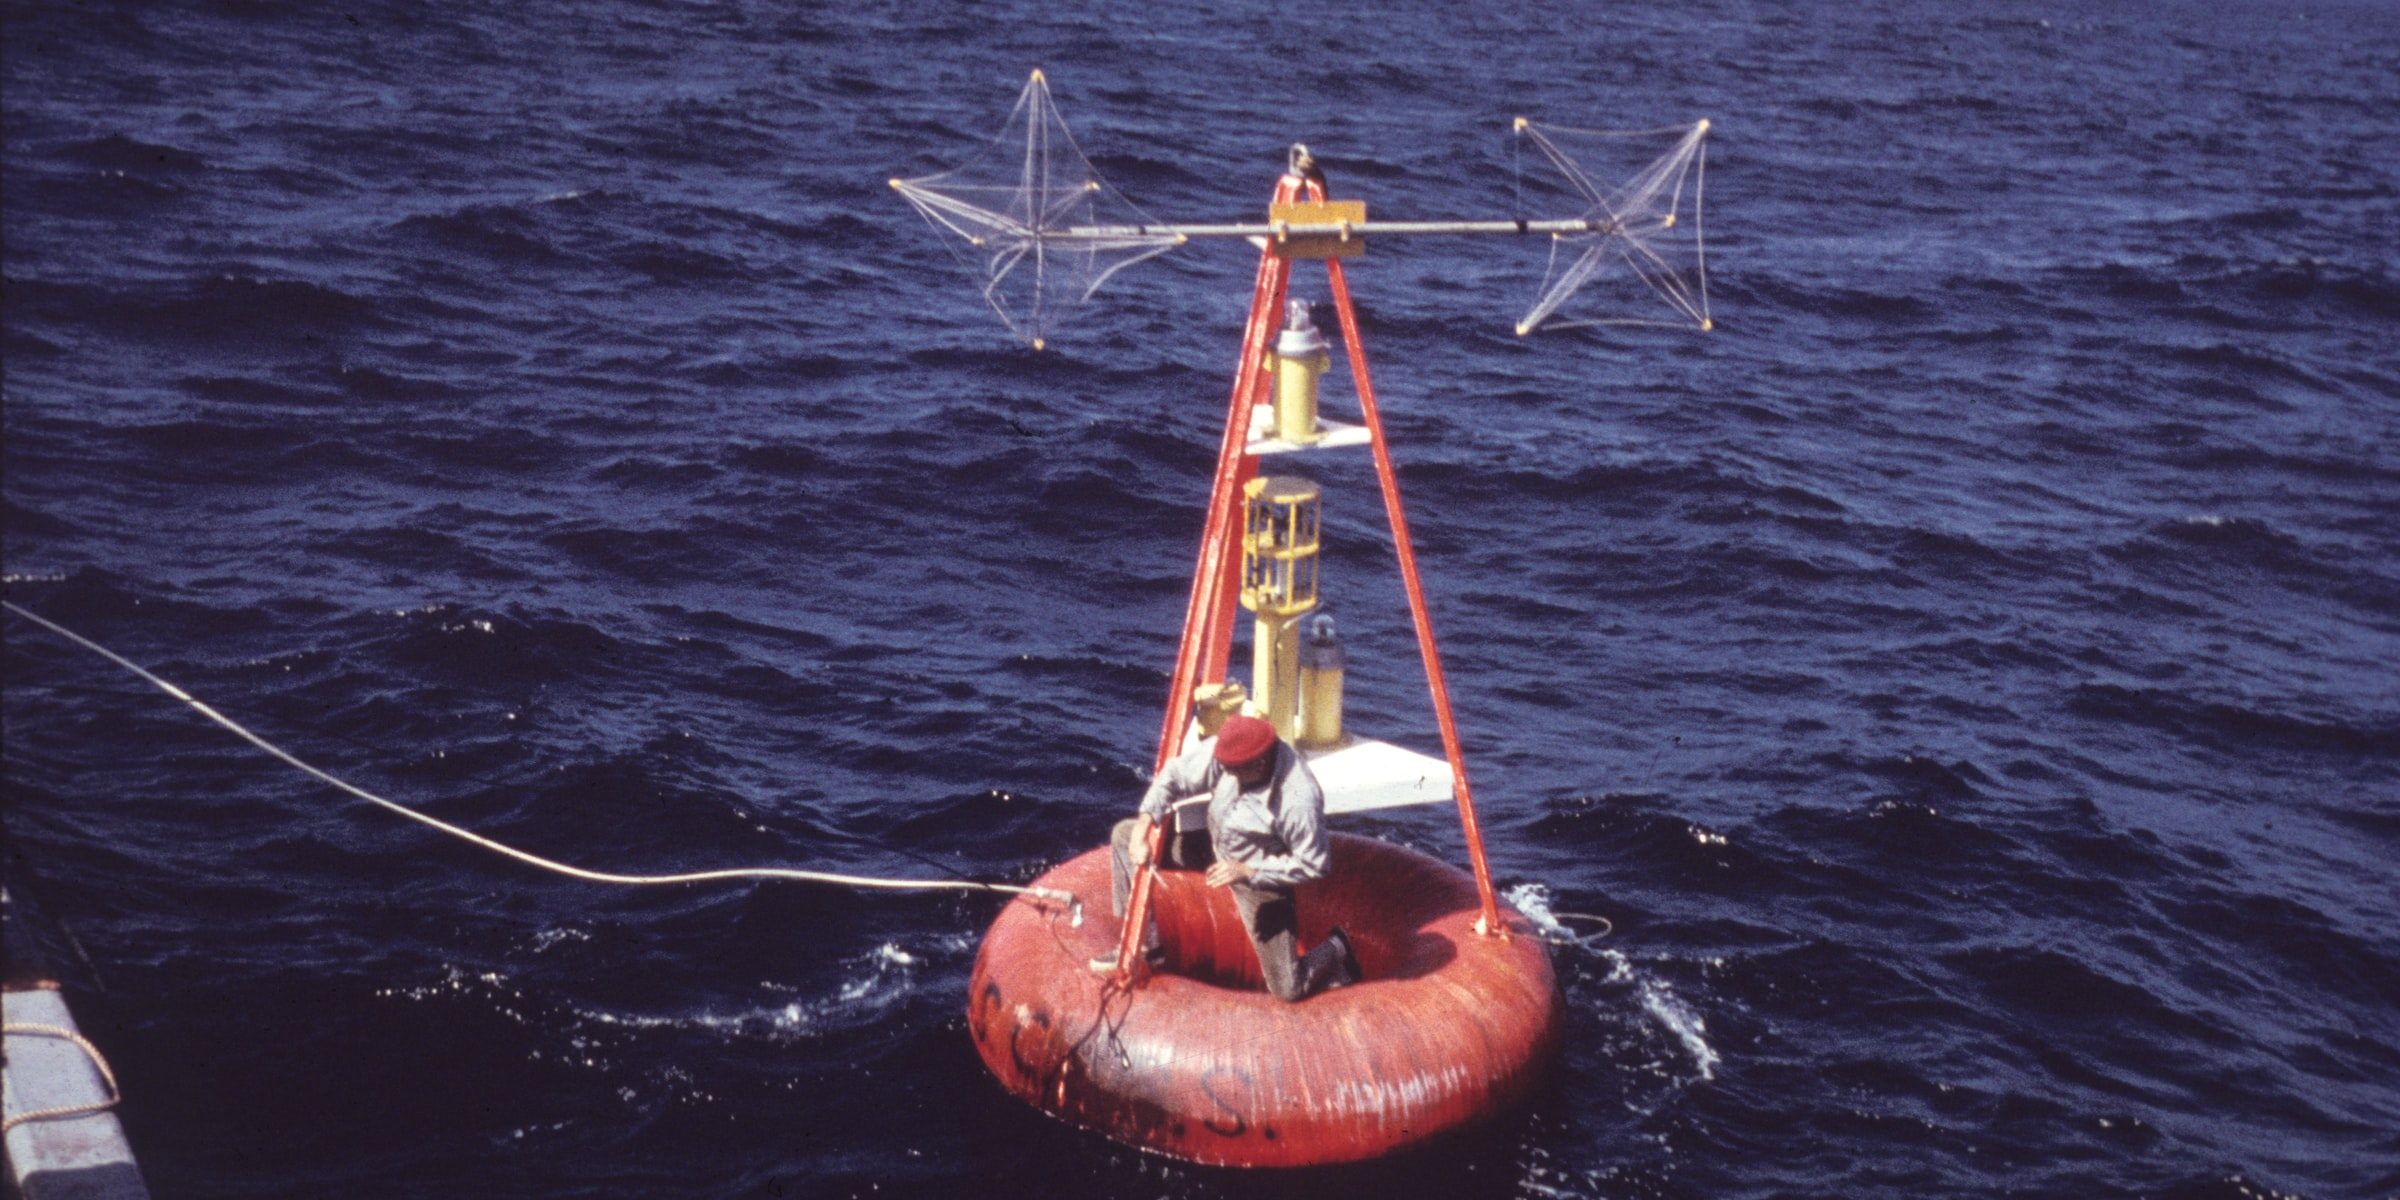 Buoy outfitted for measuring geomagnetic parameters.